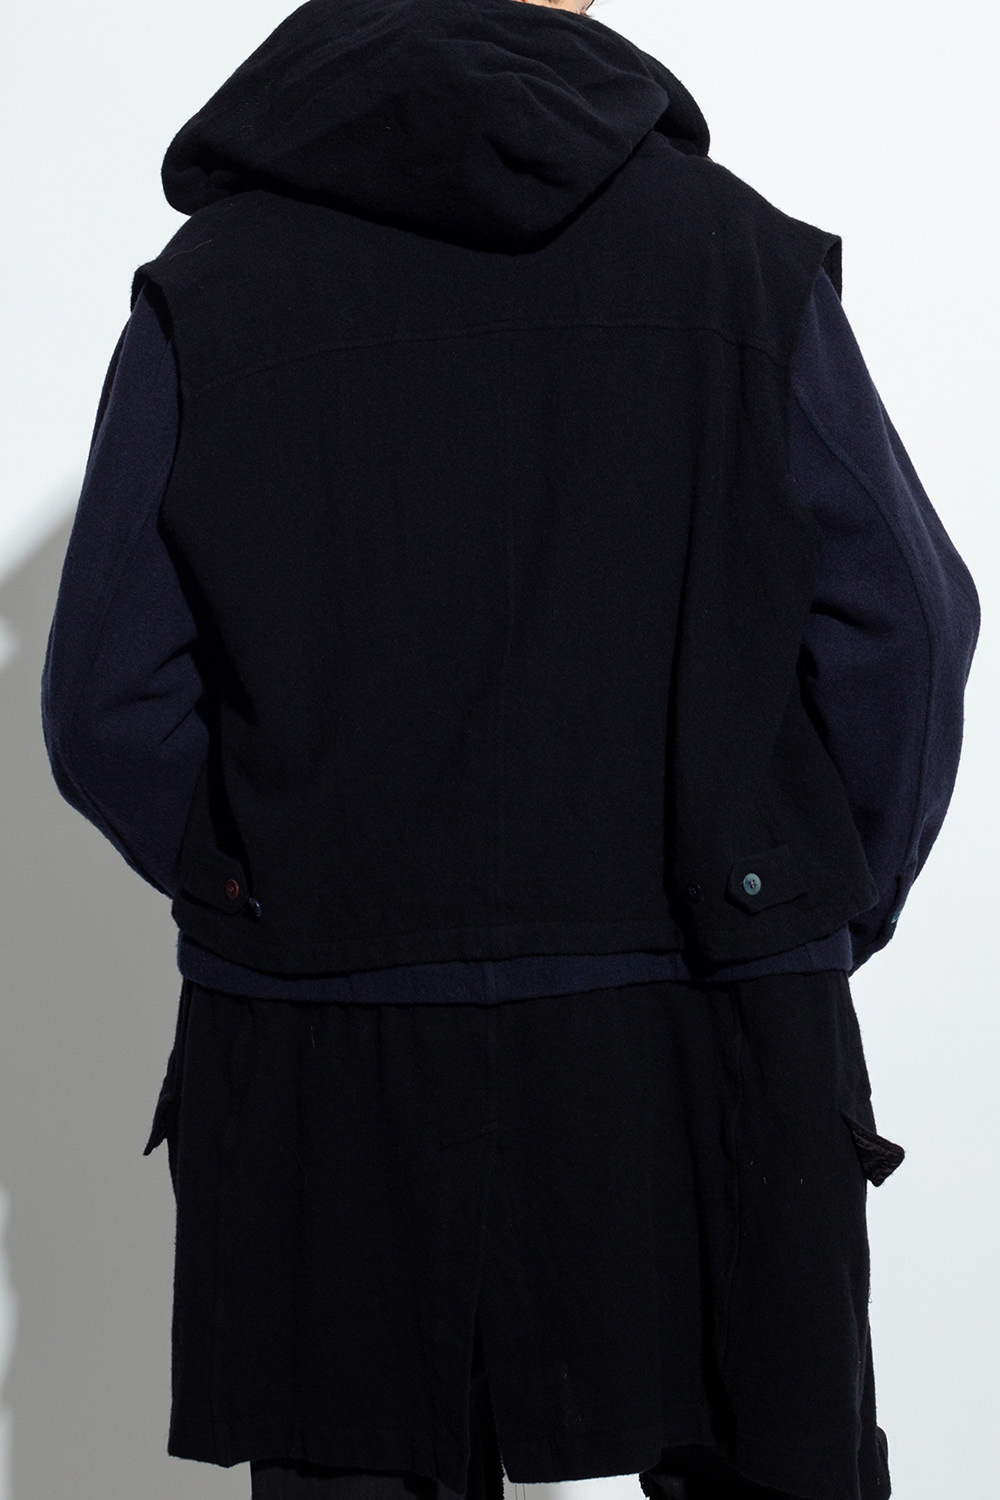 Undercover lemaire buttoned shirt jacket item